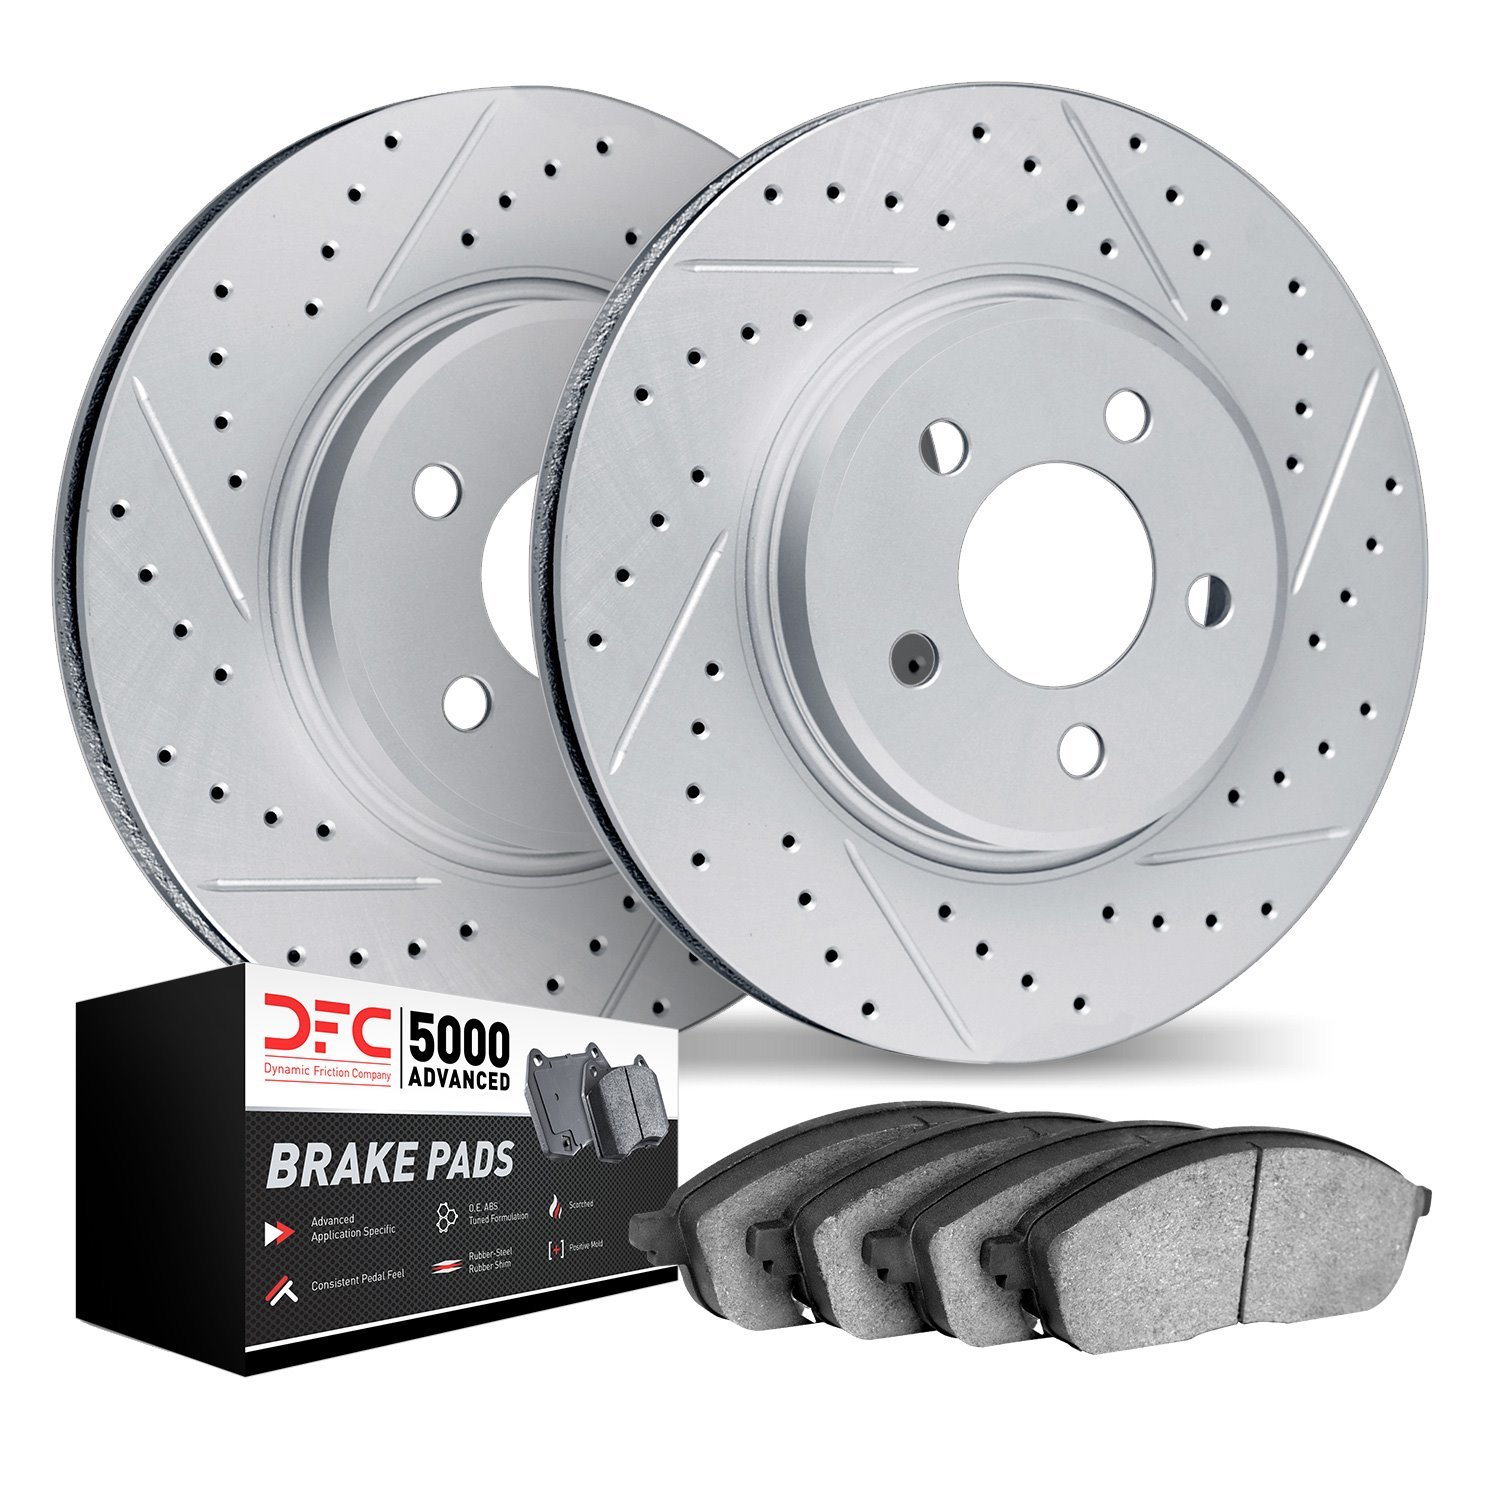 2502-02013 Geoperformance Drilled/Slotted Rotors w/5000 Advanced Brake Pads Kit, 1986-1986 Porsche, Position: Front